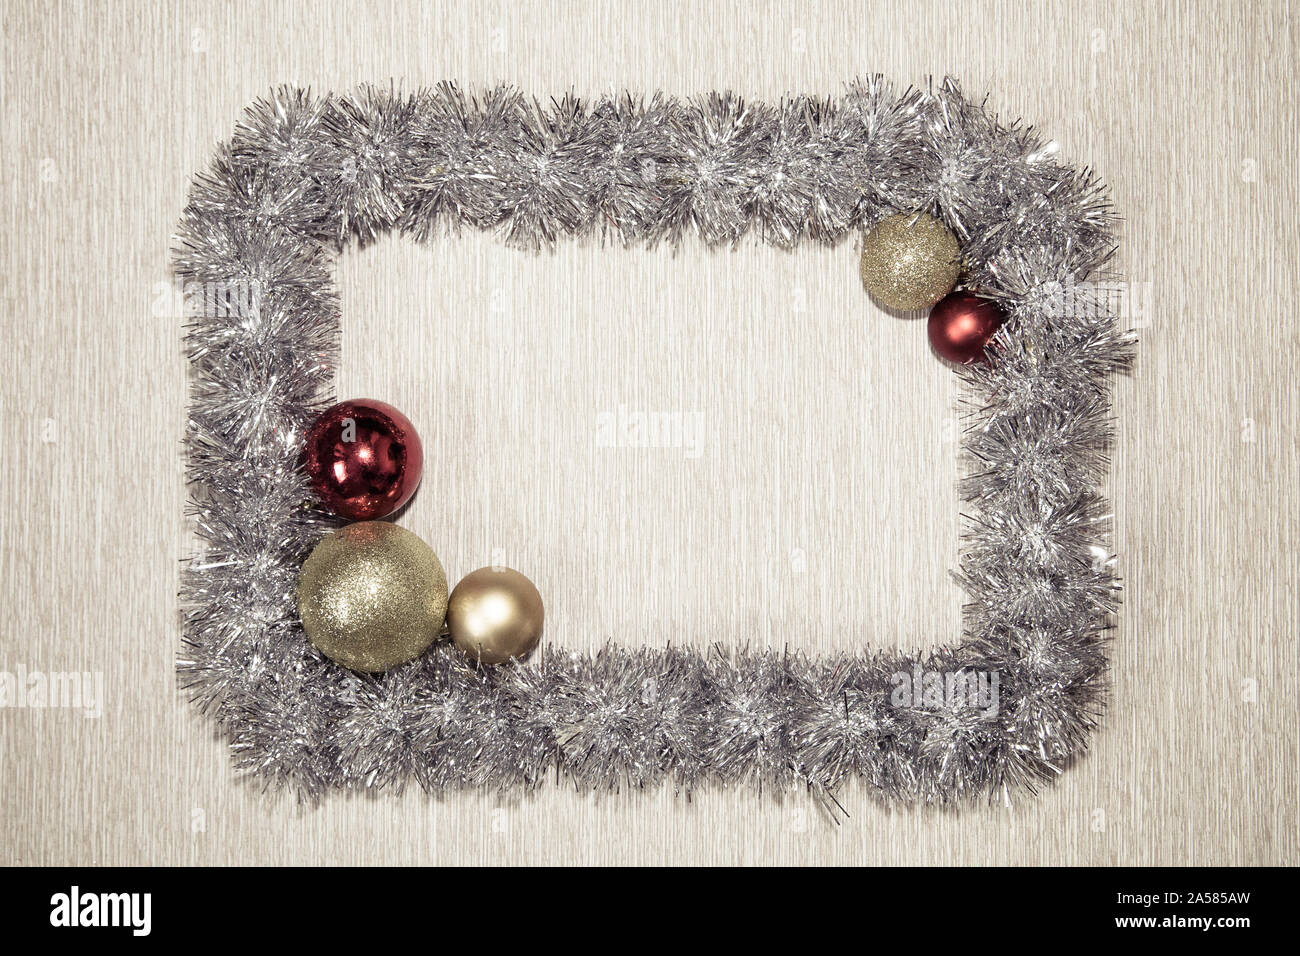 Frame made from silver tinsel decorations for christmas. Christmas tinsel garland, forming a rectangular frame with center copy space. tinsel frame background Stock Photo